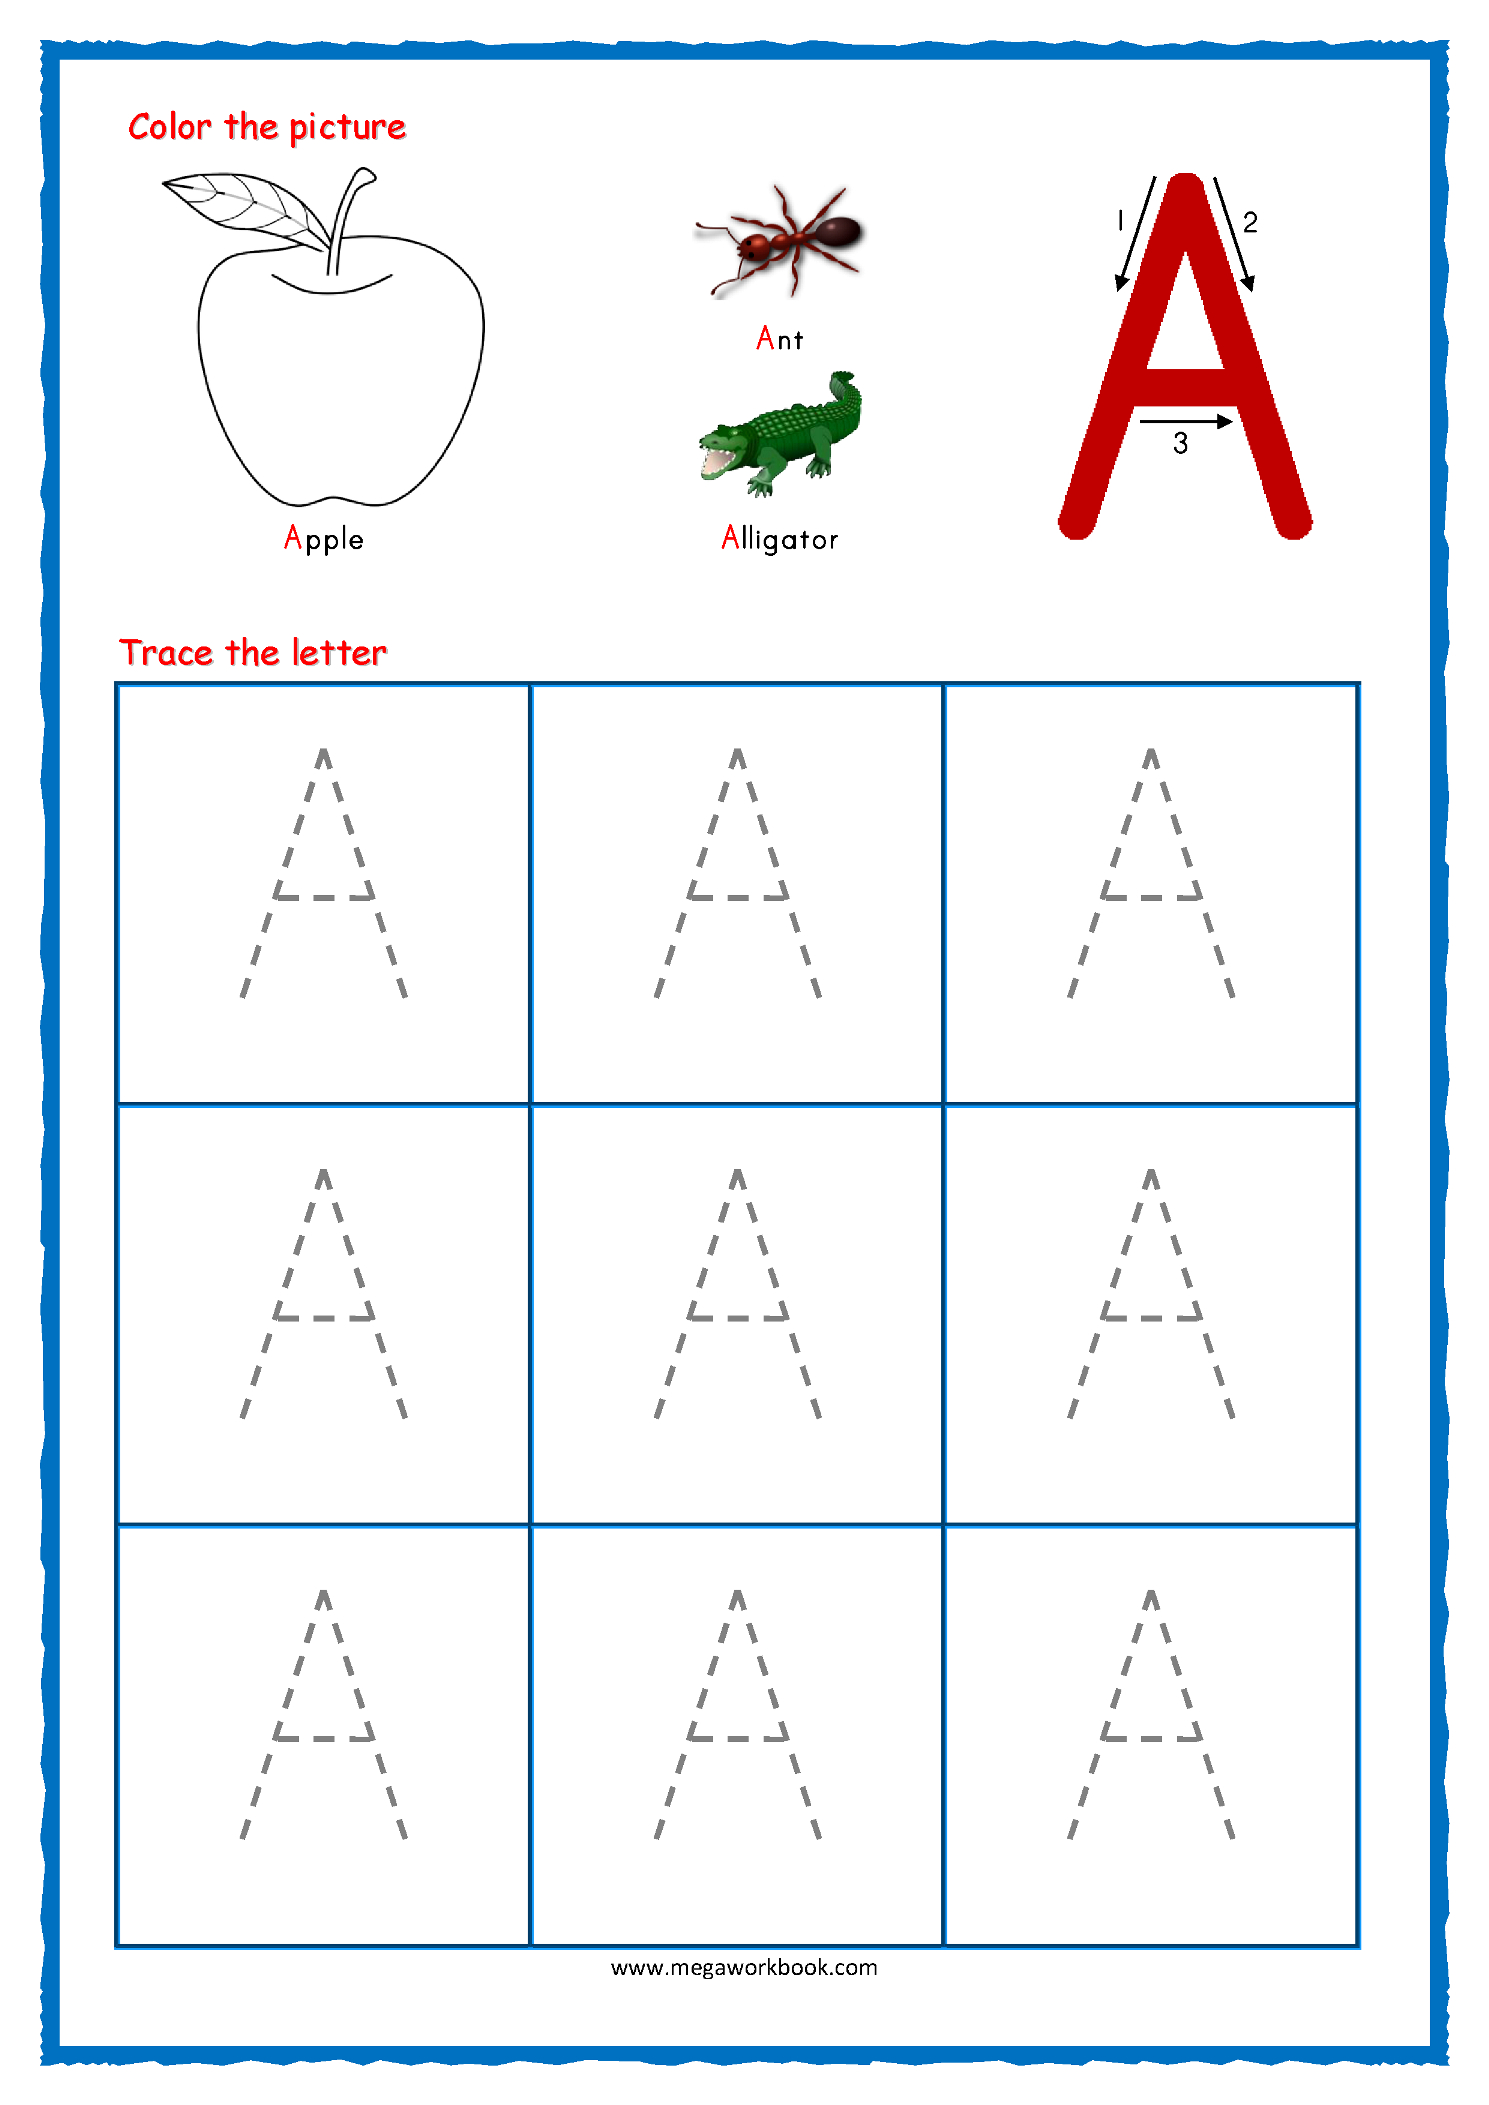 Tracing Letters - Alphabet Tracing - Capital Letters pertaining to Alphabet Tracing For Toddlers